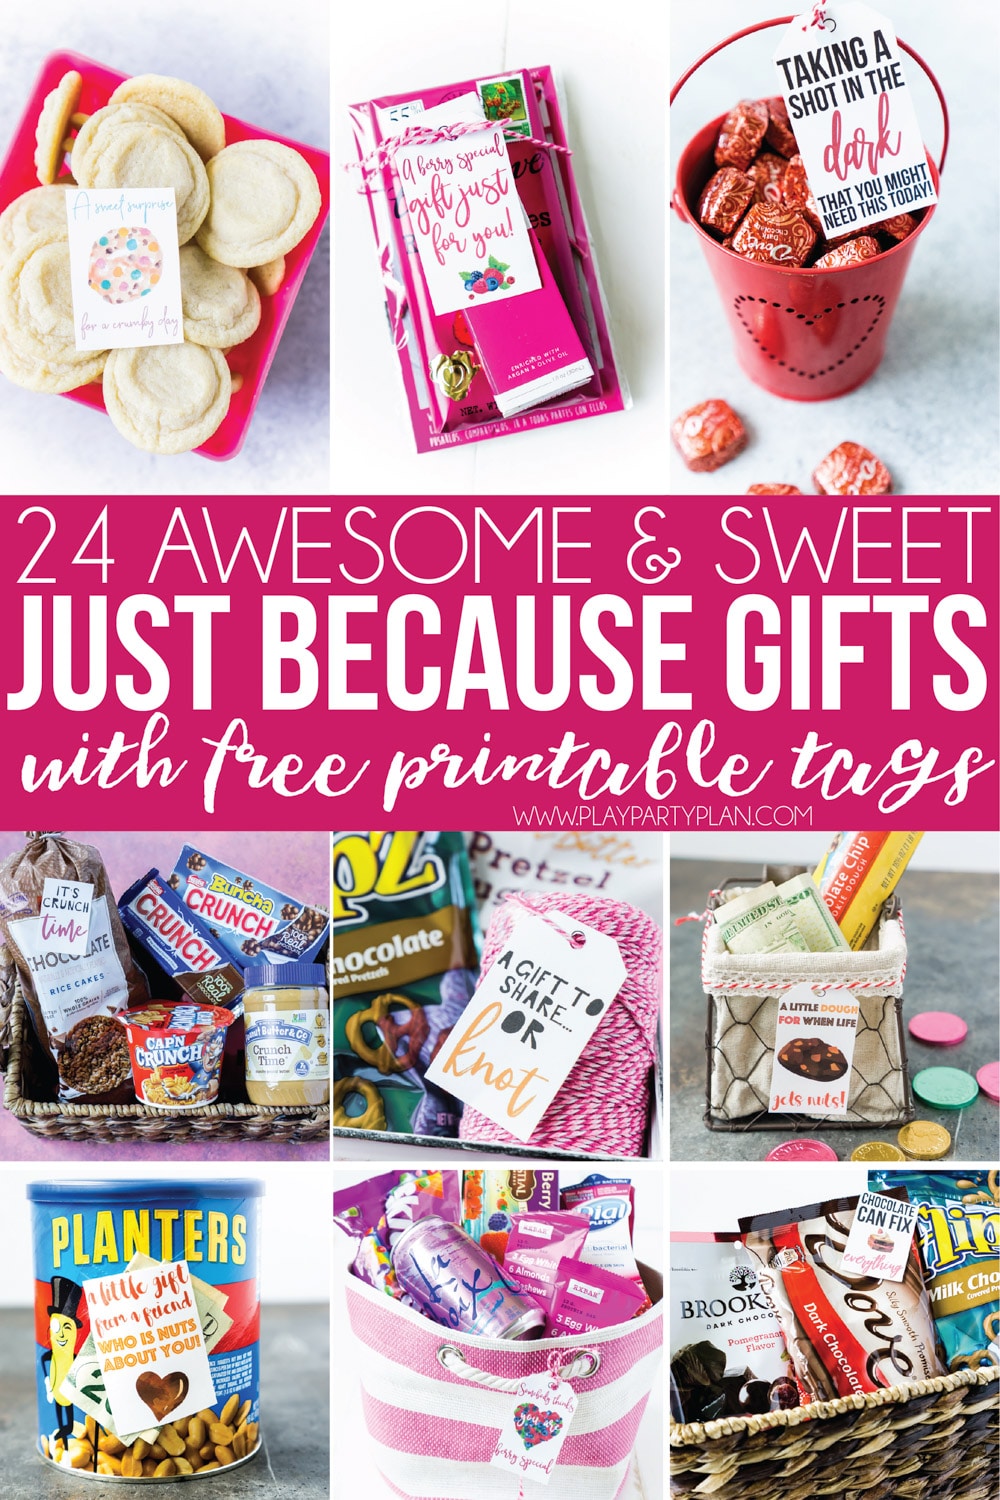 Easter Basket Ideas for the Creative Person in Your Life